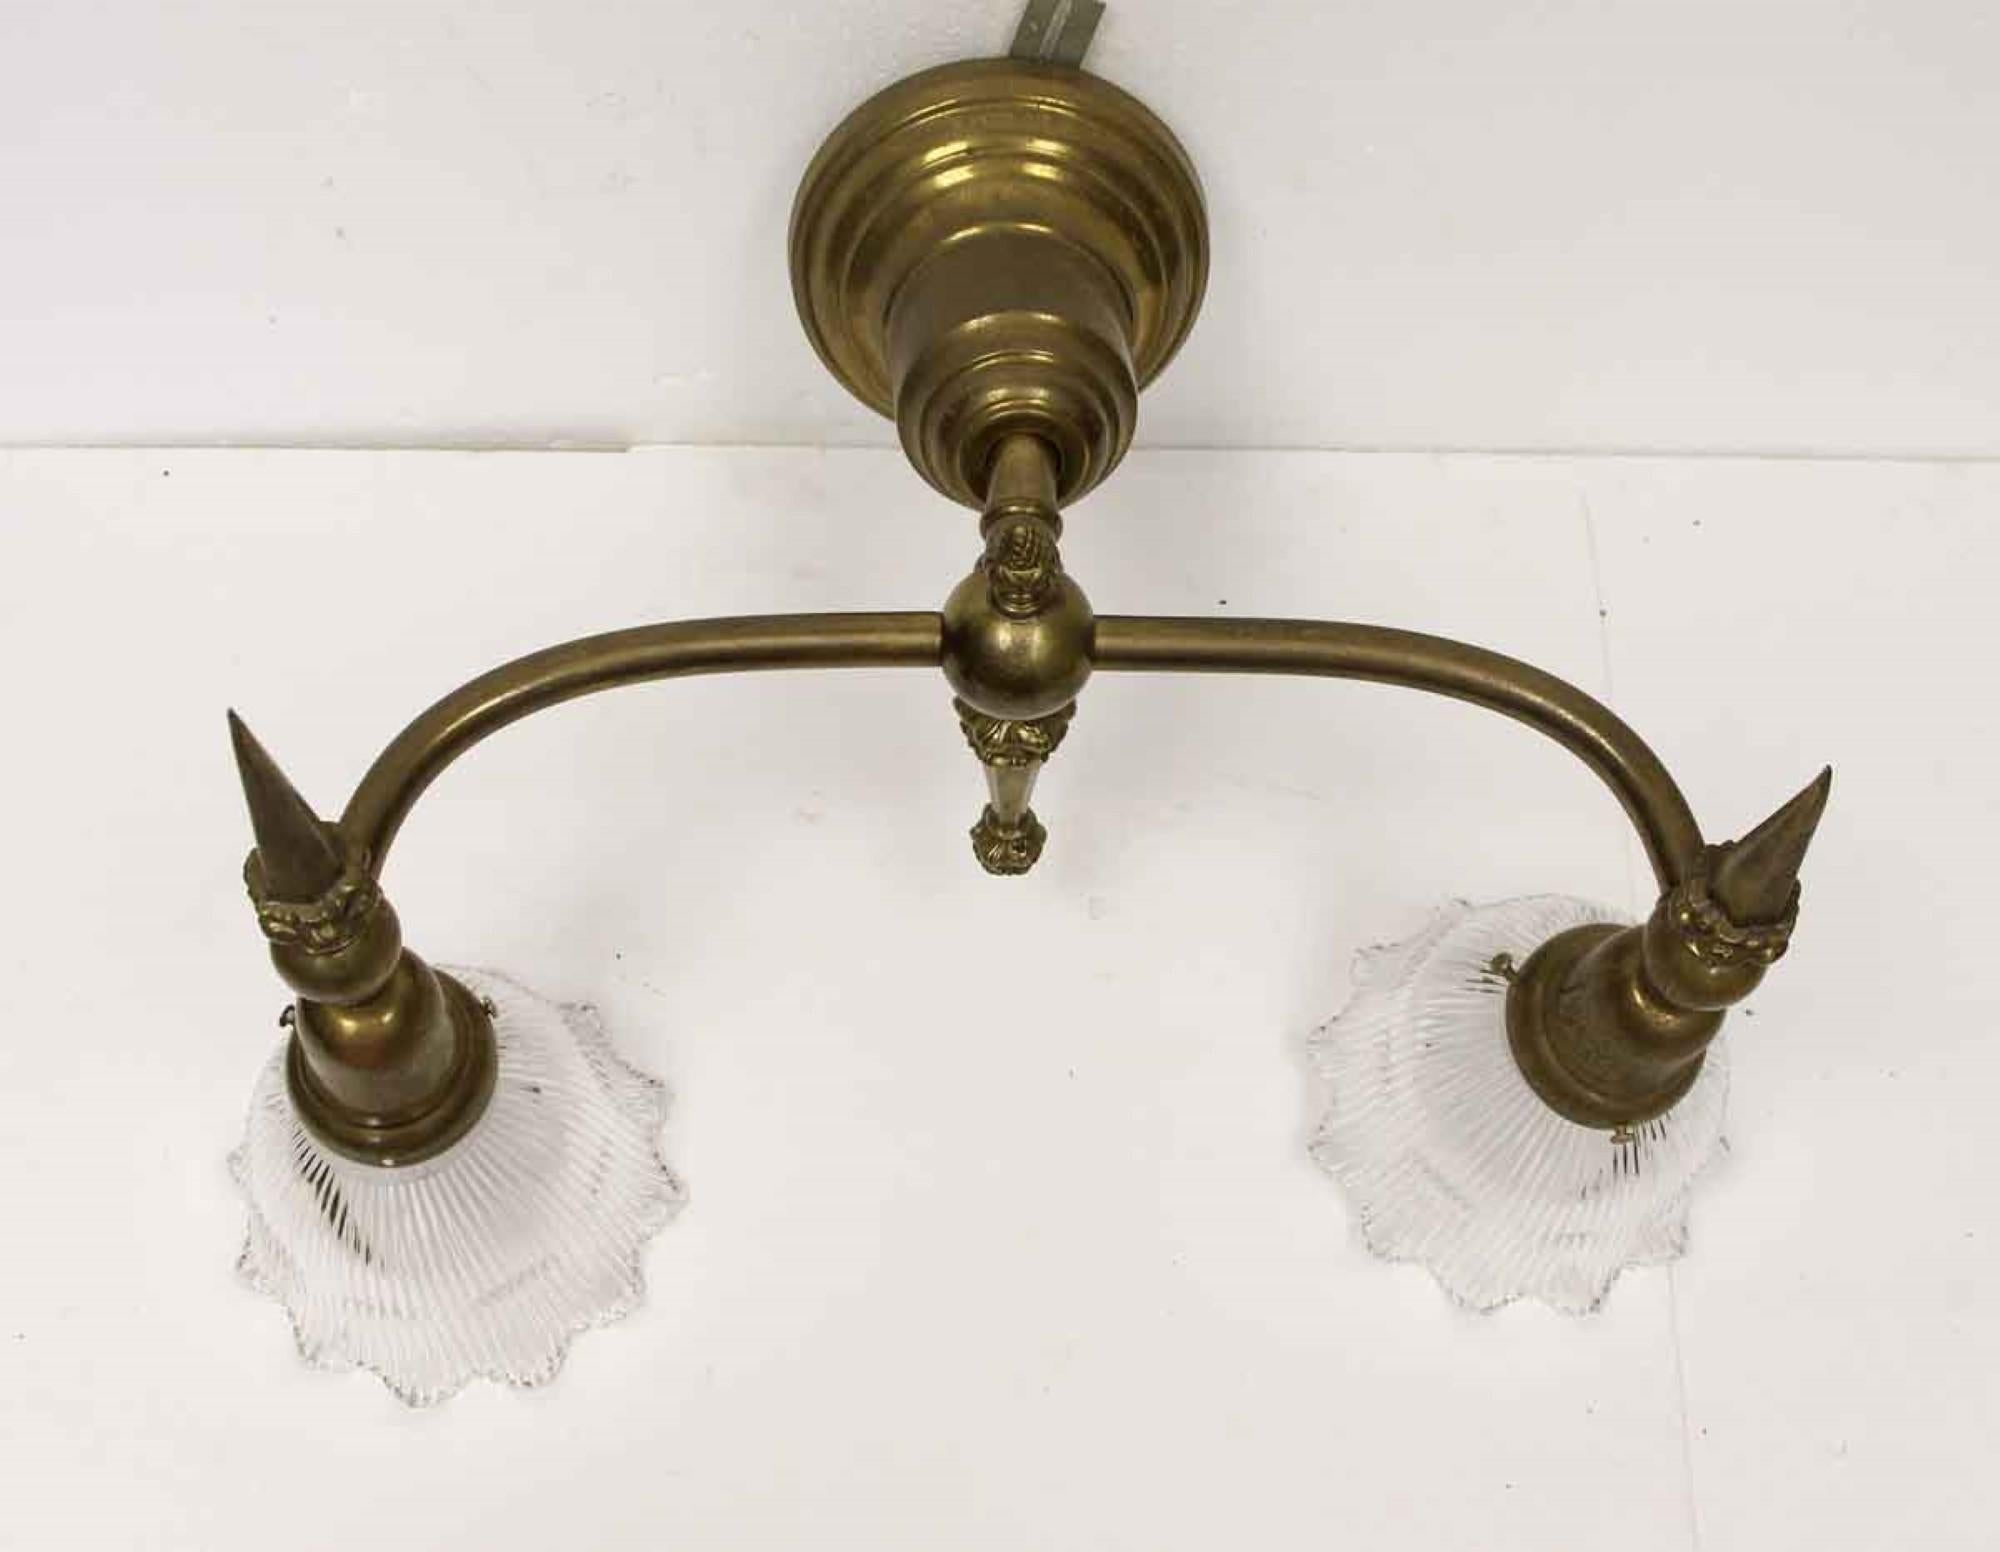 1910s large cast brass two-arm sconce with original ruffled prism glass shades. Cleaned and rewired. Small quantity available at time of posting. Priced each. Please inquire. Please note, this item is located in our Scranton, PA location.